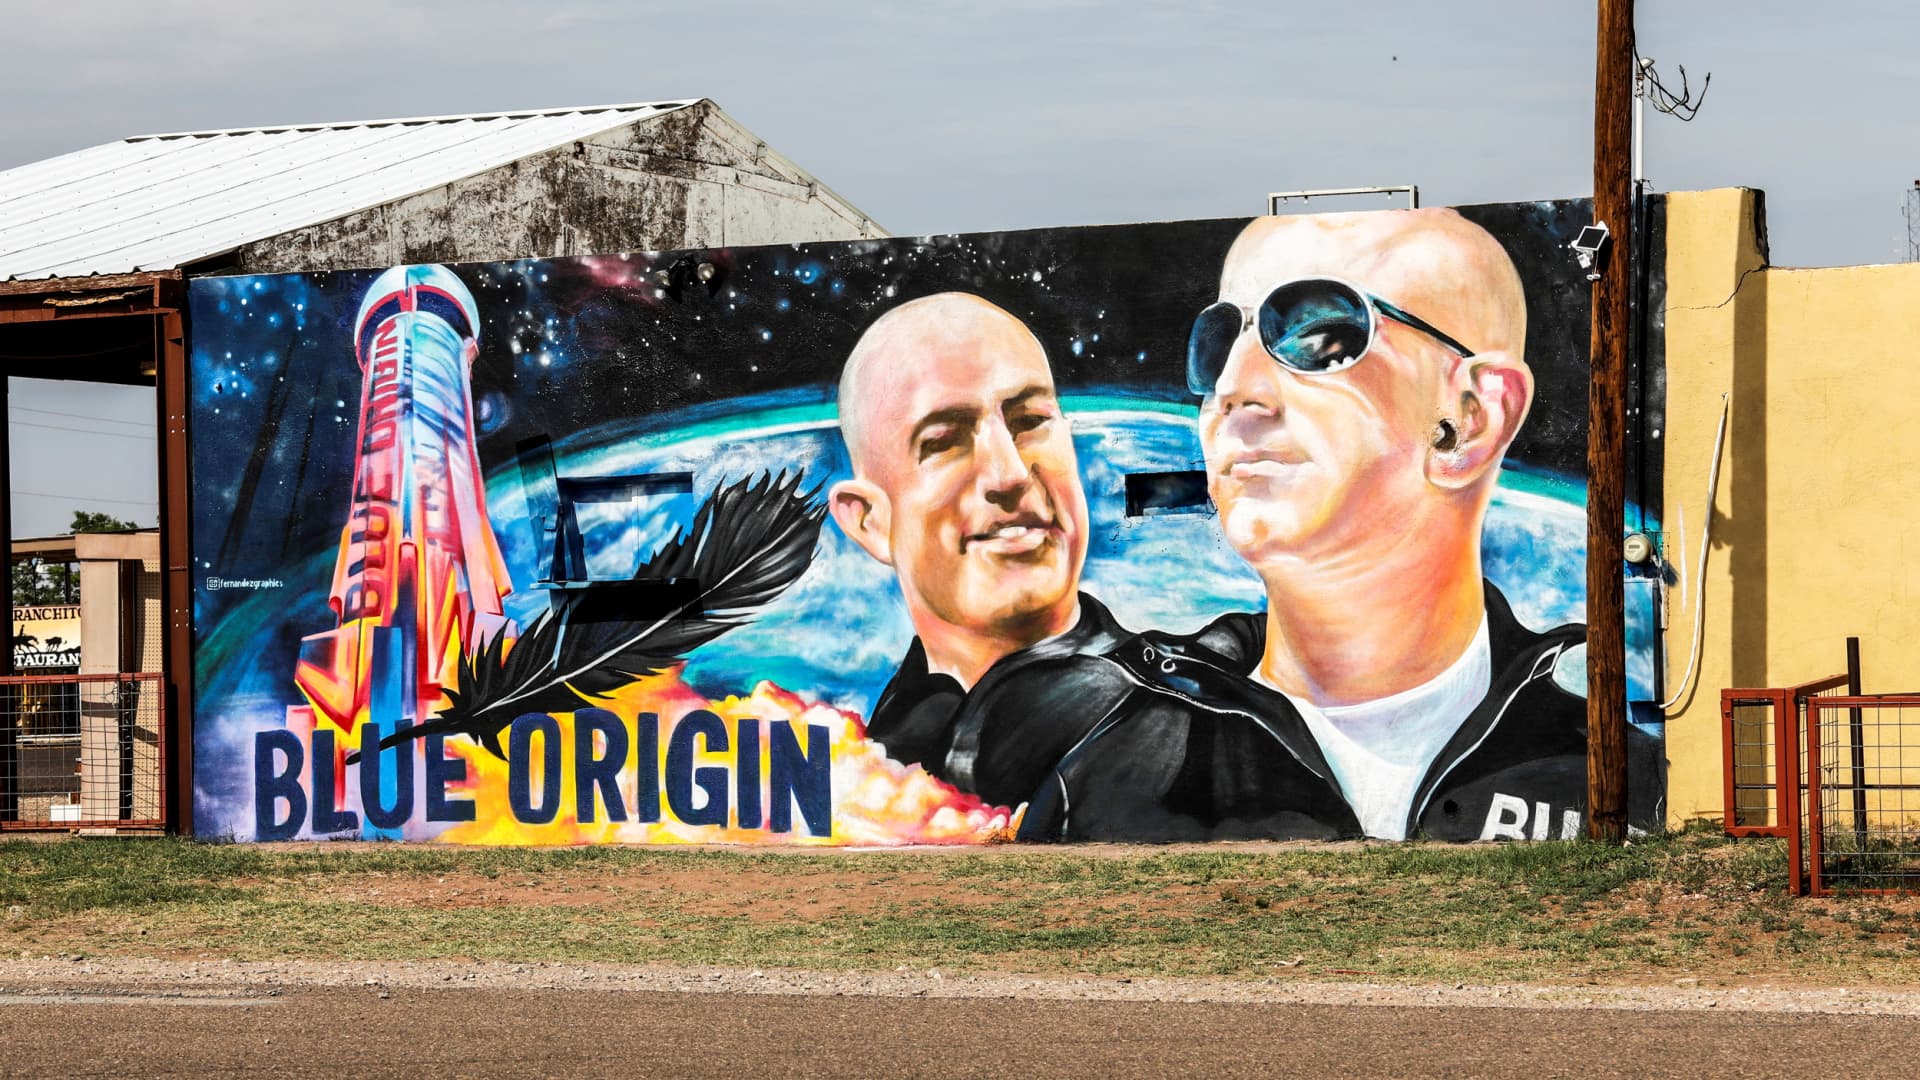 Mural displaying Jeff Bezo and his brother Mark Bezo, is seen in Van Horn, Texas, two days before the scheduled launch of Blue Origin's inaugural flight to the edge of space by billionaire American businessman Jeff Bezos and his three crewmates, in the nearby town of Van Horn, Texas, U.S. July 18, 2021.